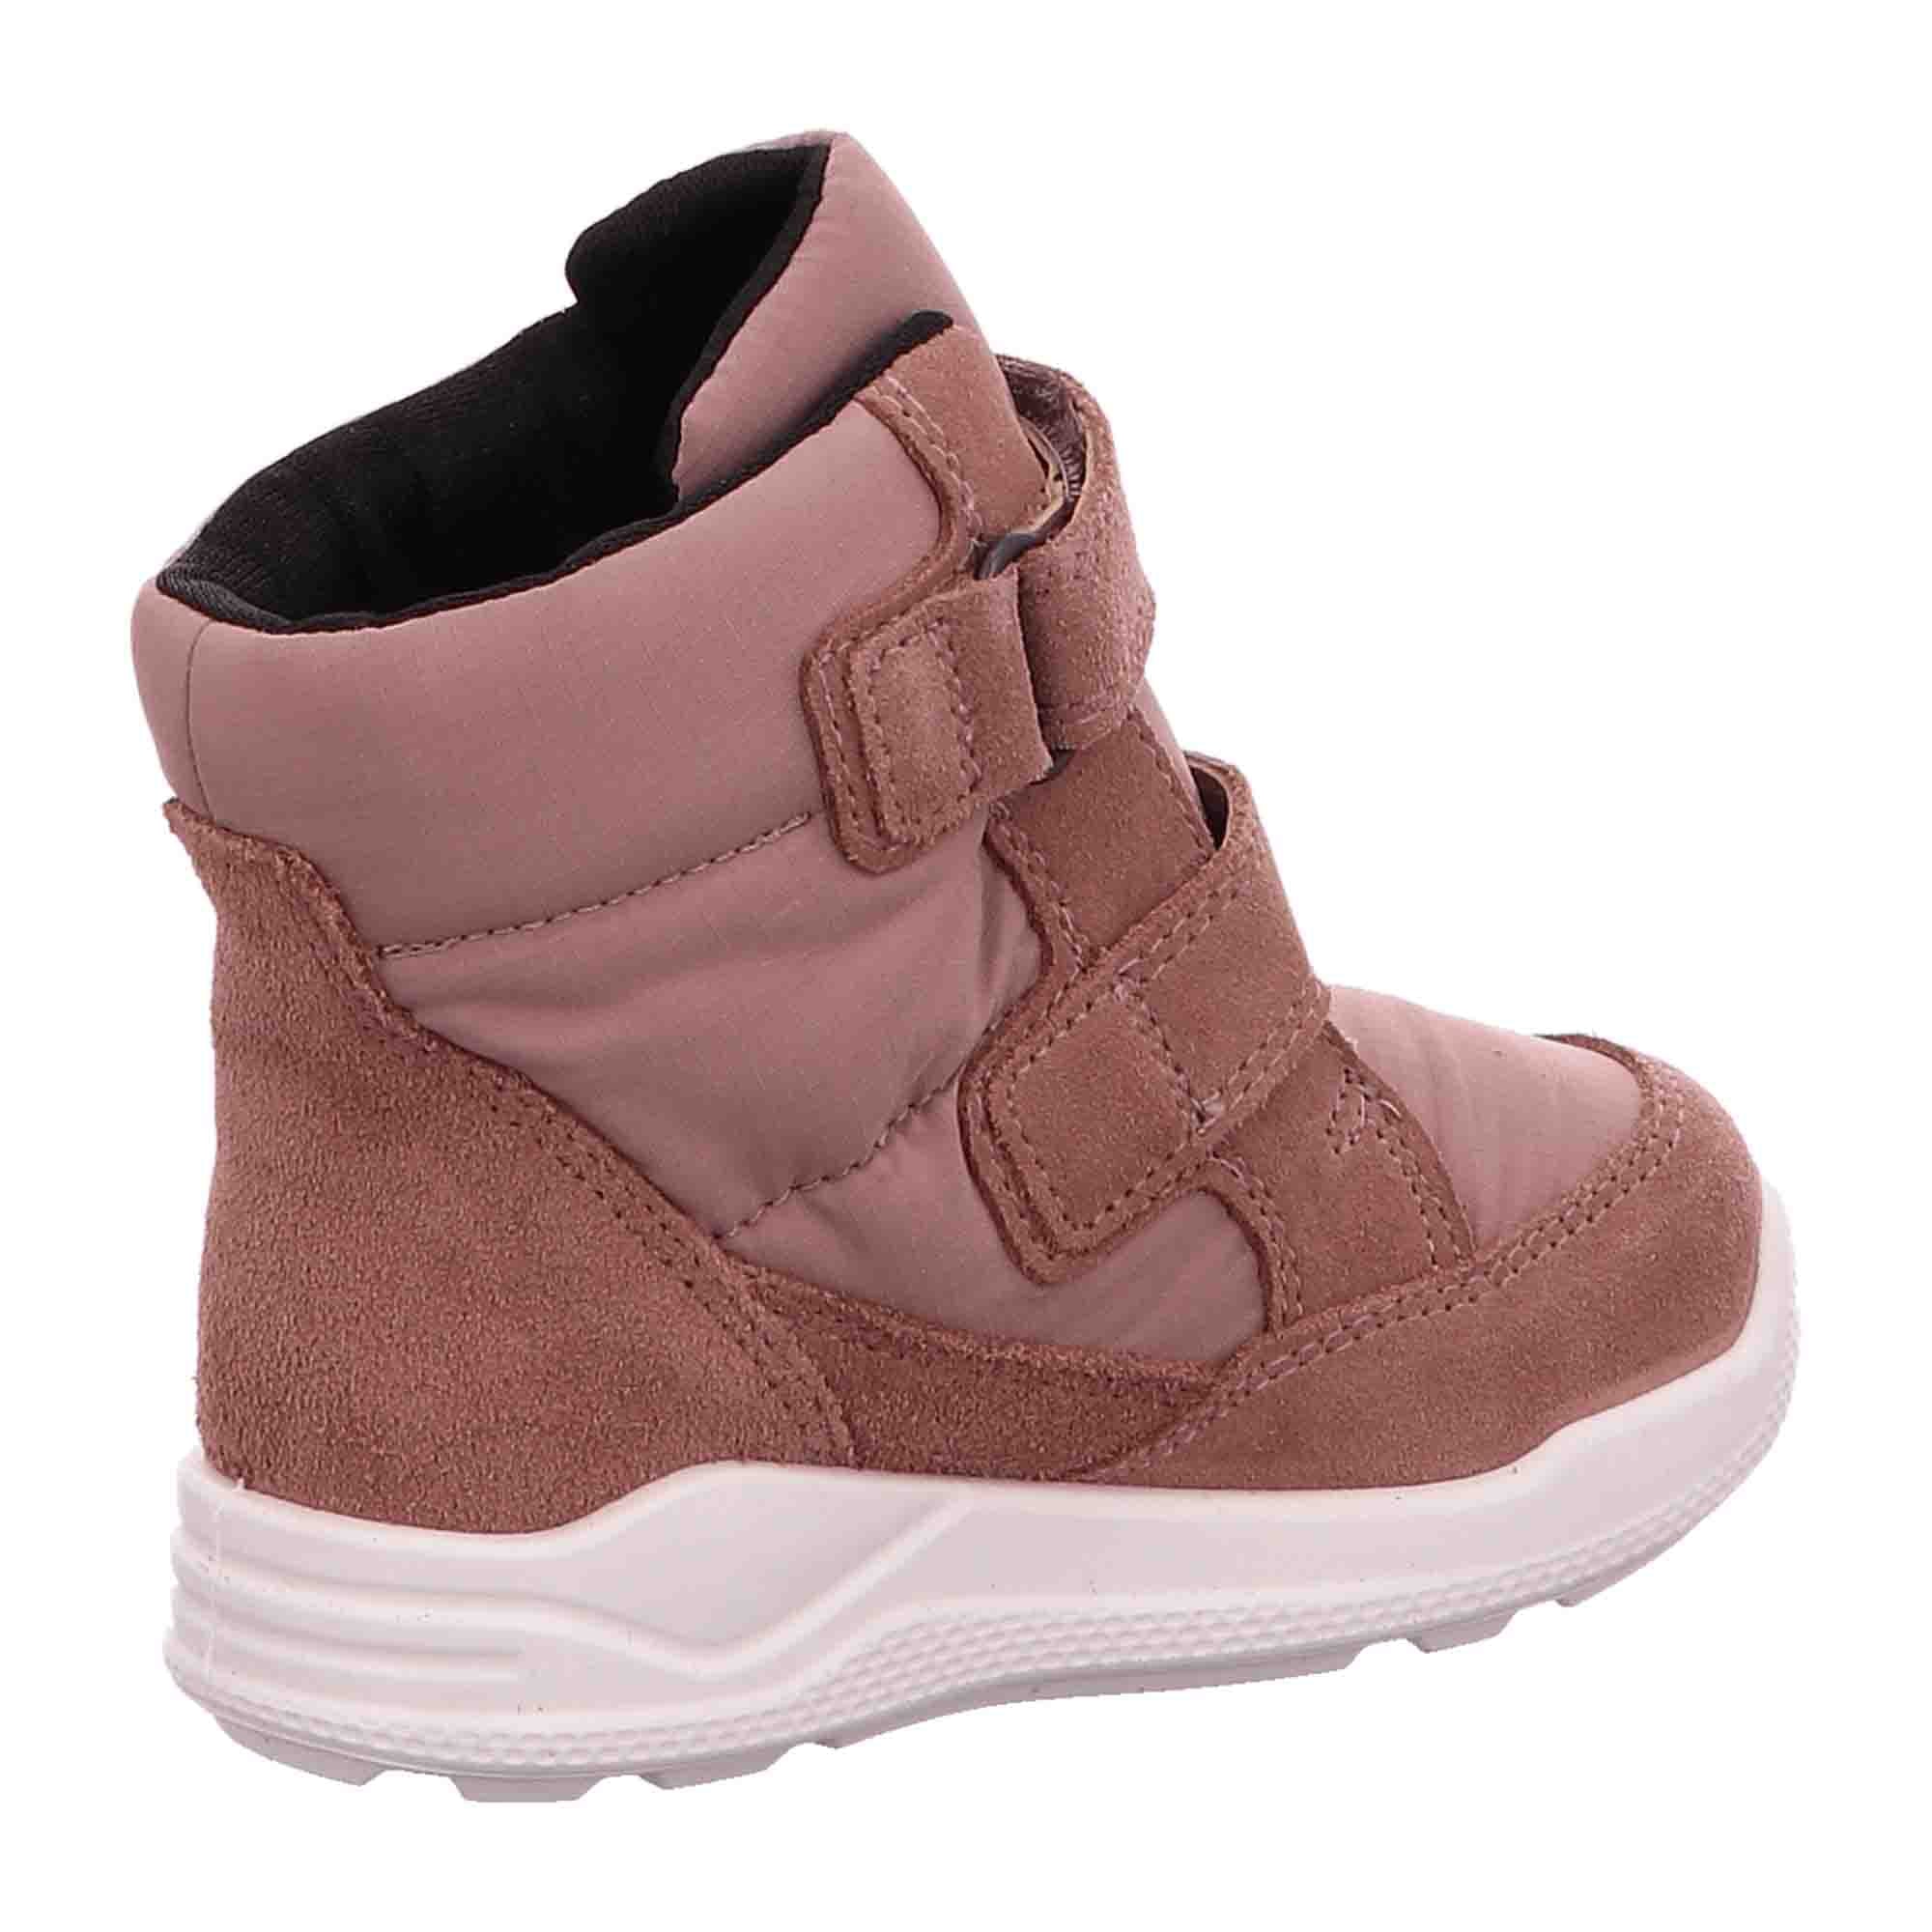 Ecco 764801 Kids' Pink Durable Shoes - Stylish & Comfortable